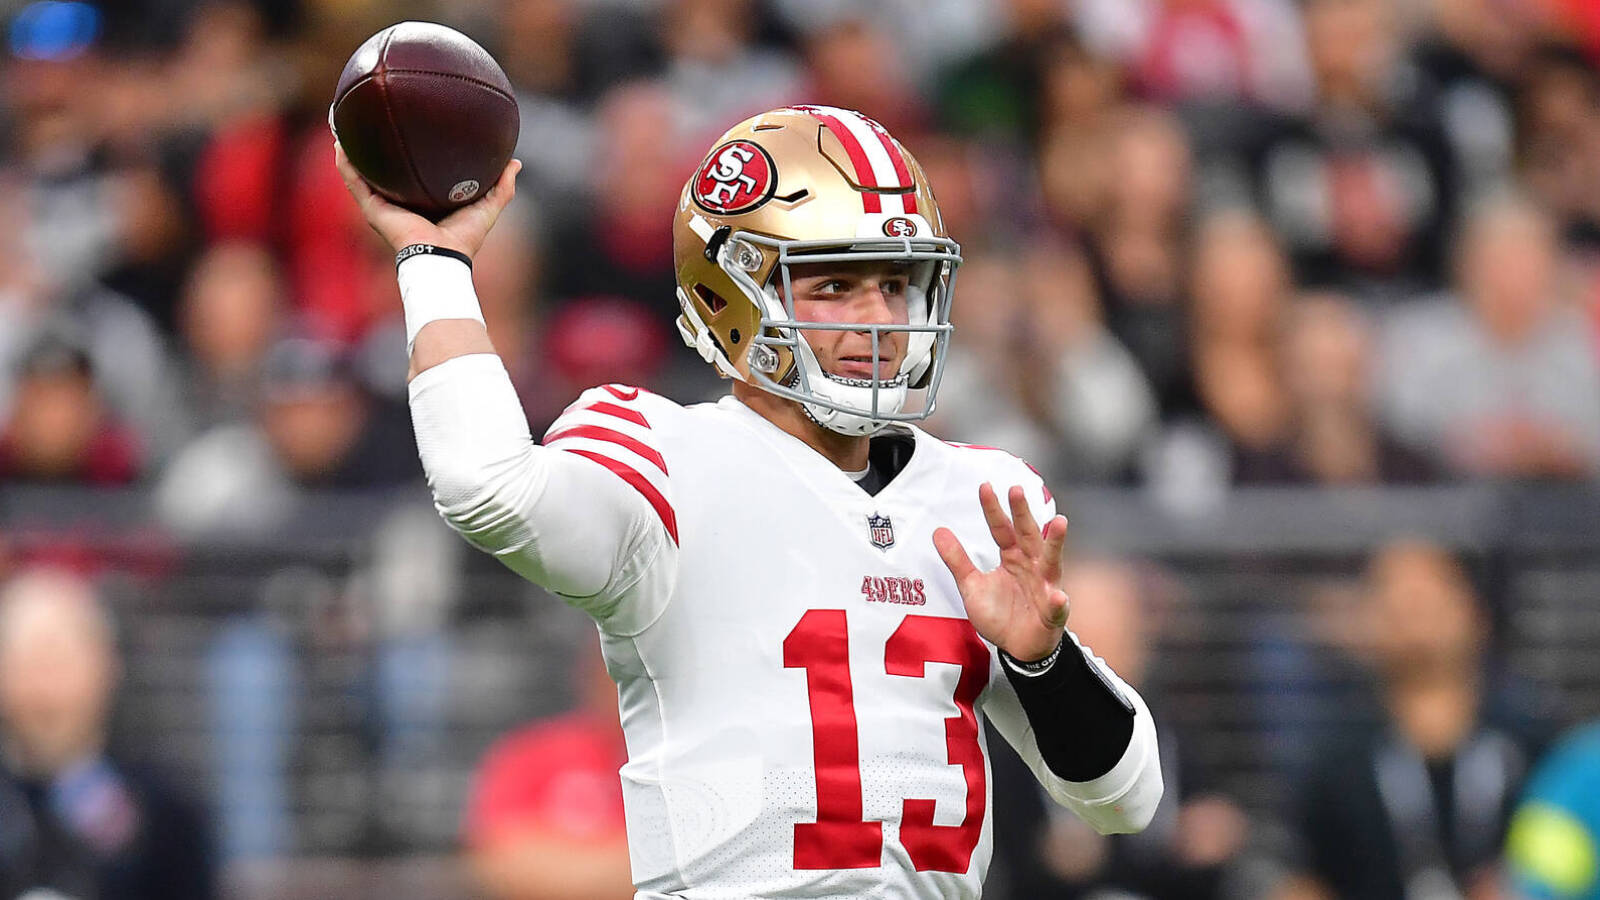 Kyle Shanahan not surprised by Brock Purdy's mastery of the 49ers offense